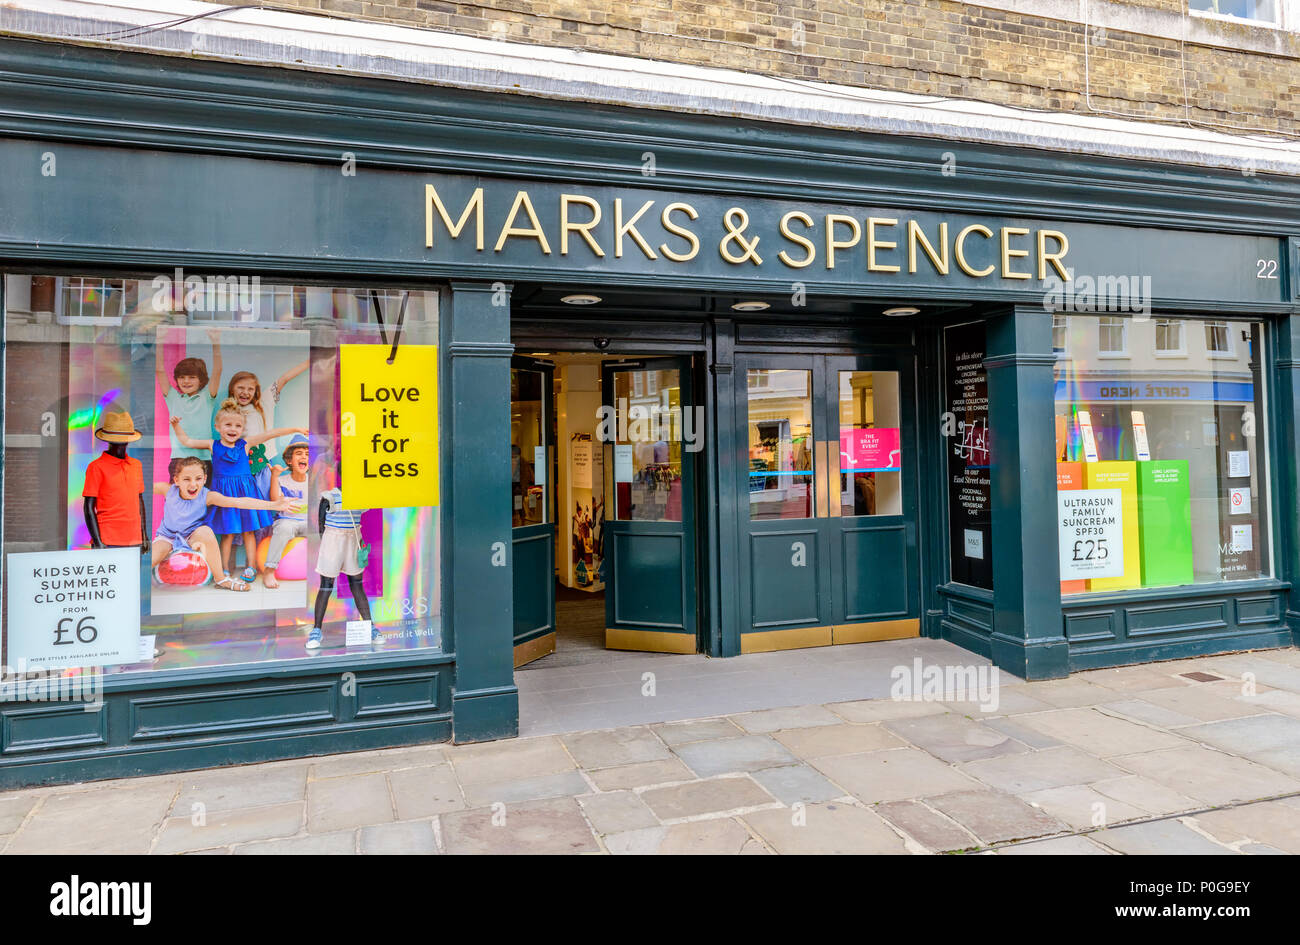 marks and spencer shop front Stock Photo - Alamy